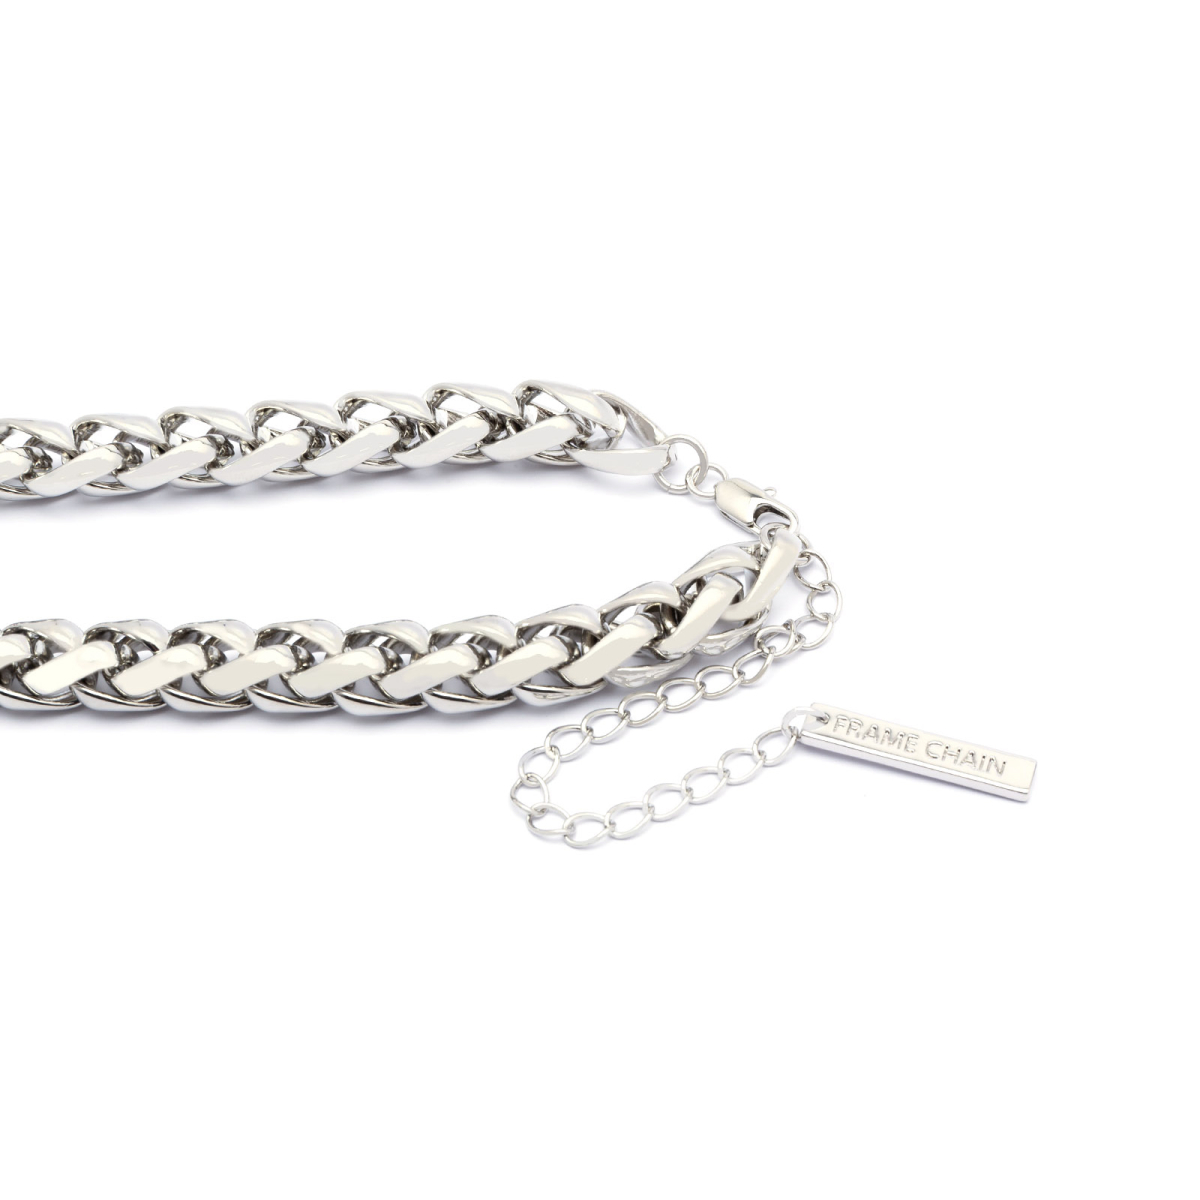 Frame Chain® Accessories: Hooker Monkey color White Gold - 1/6.